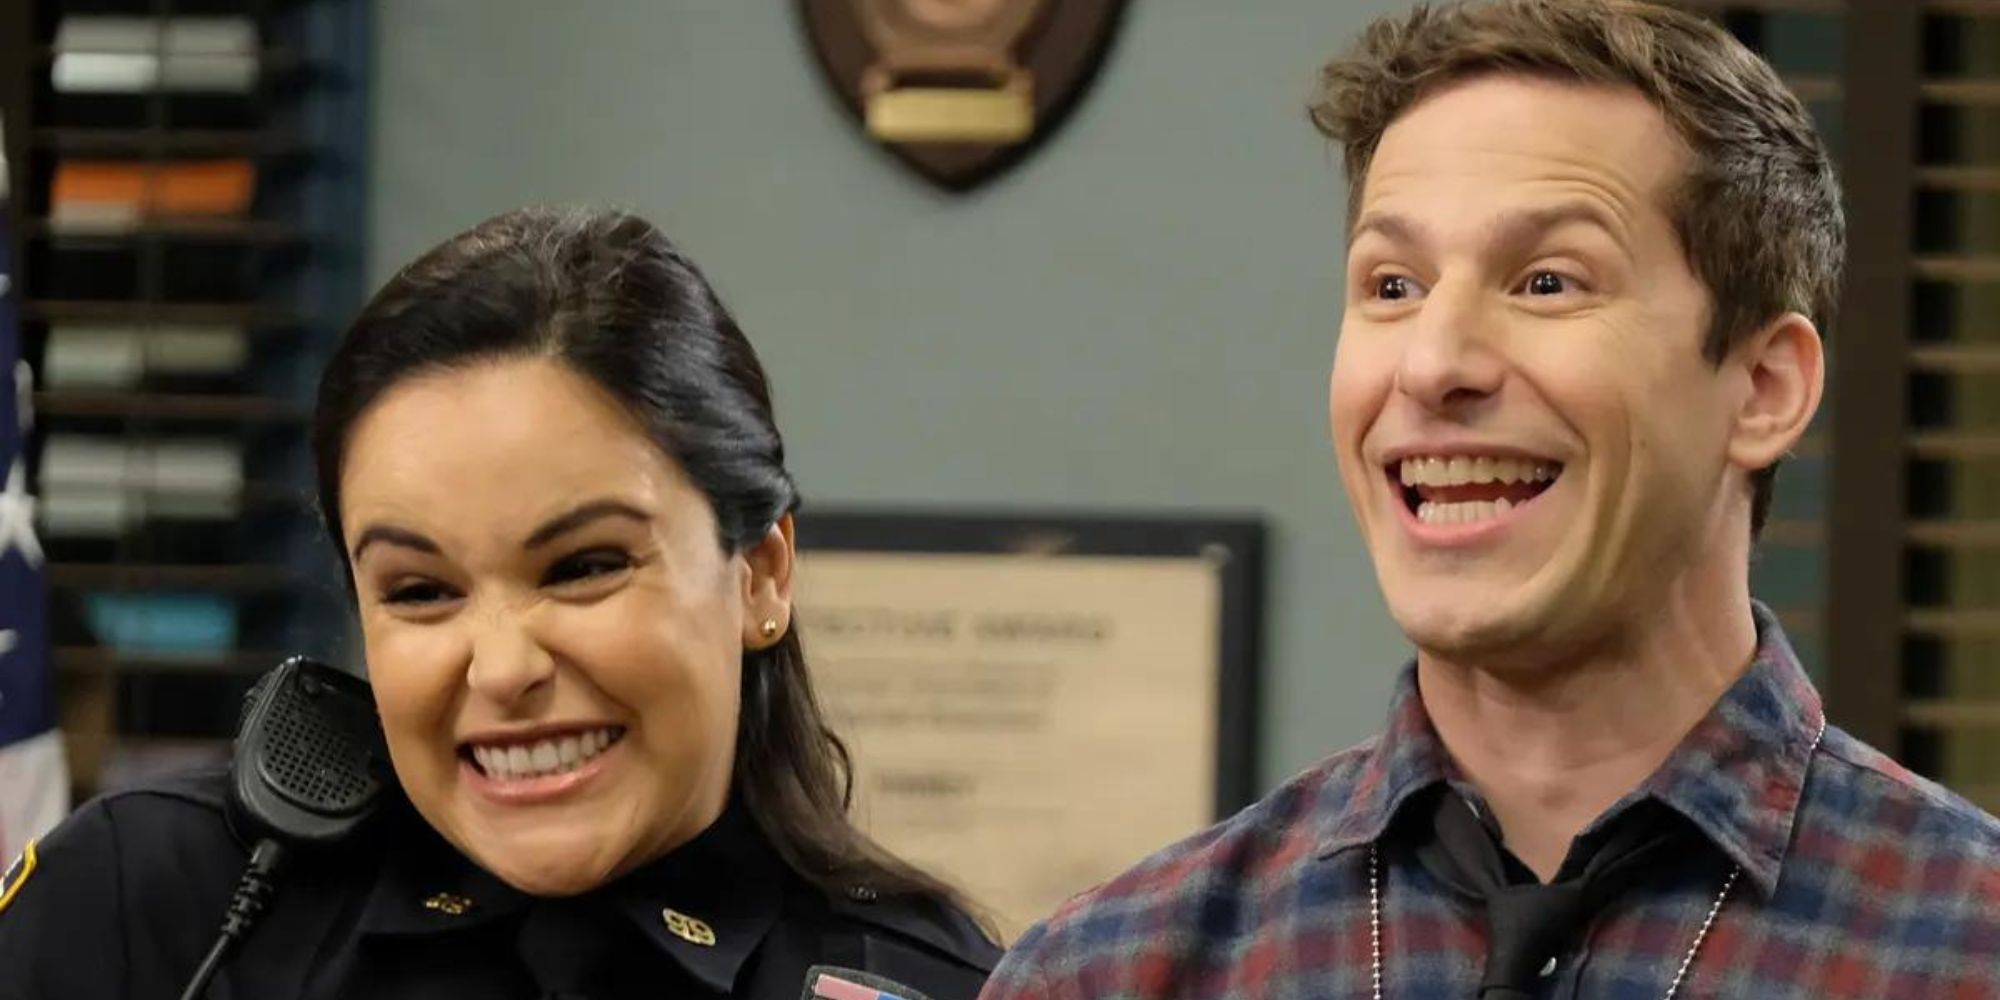 Jake and Amy from Brooklyn Nine-Nine smiling and squealing